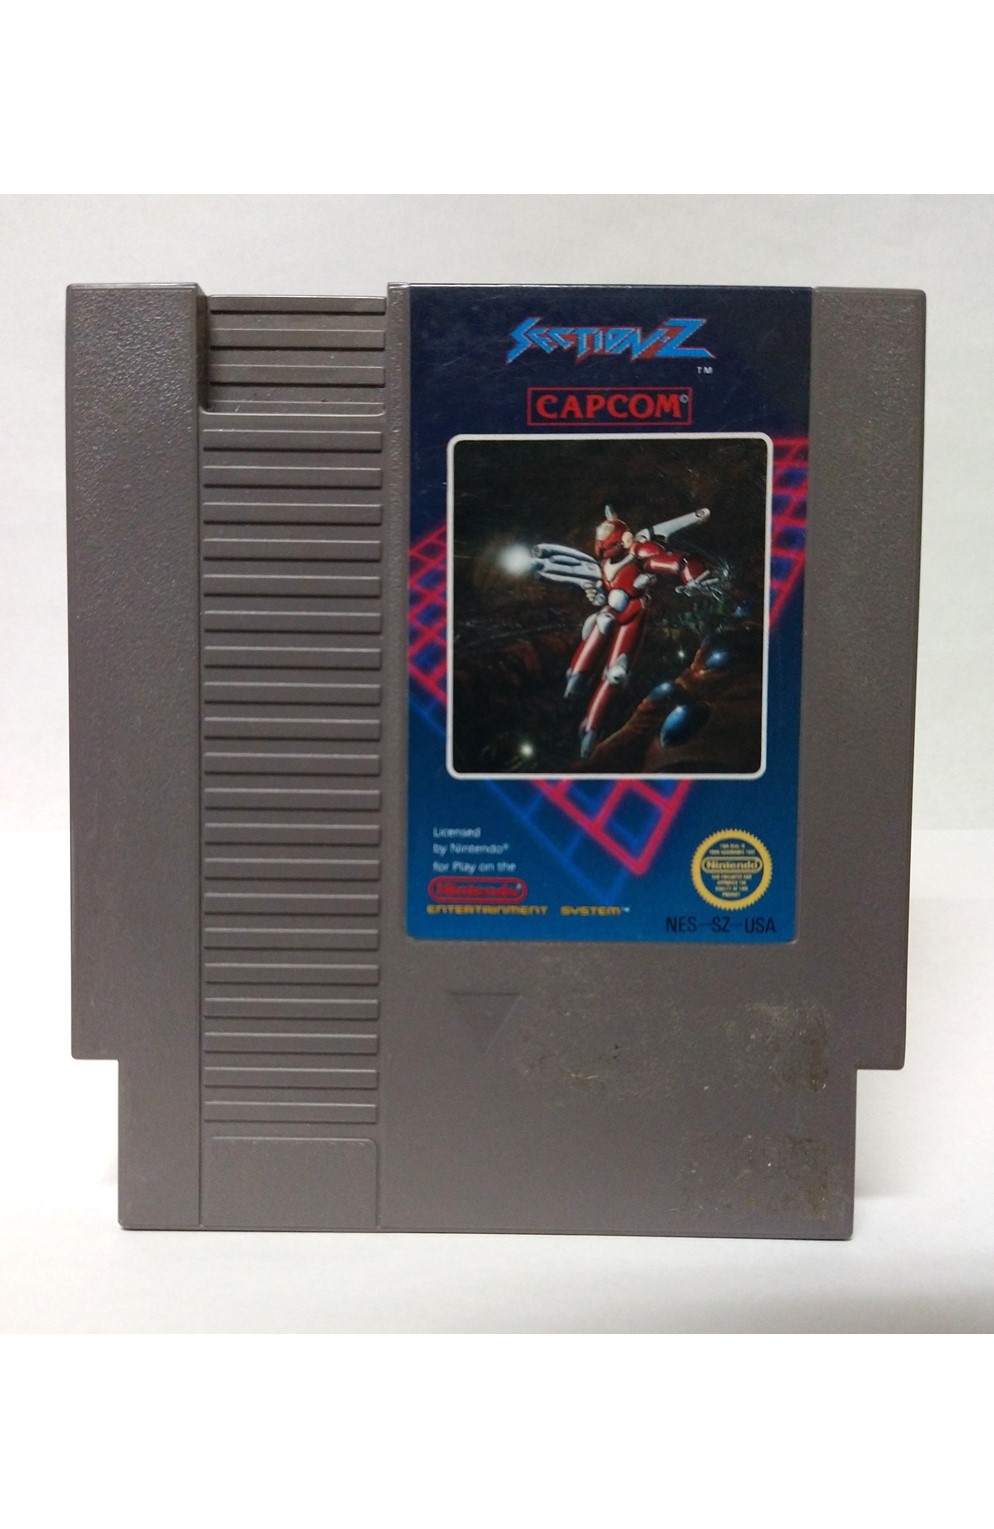 Nintendo Nes Section Z - Cartridge Only - Pre-Owned